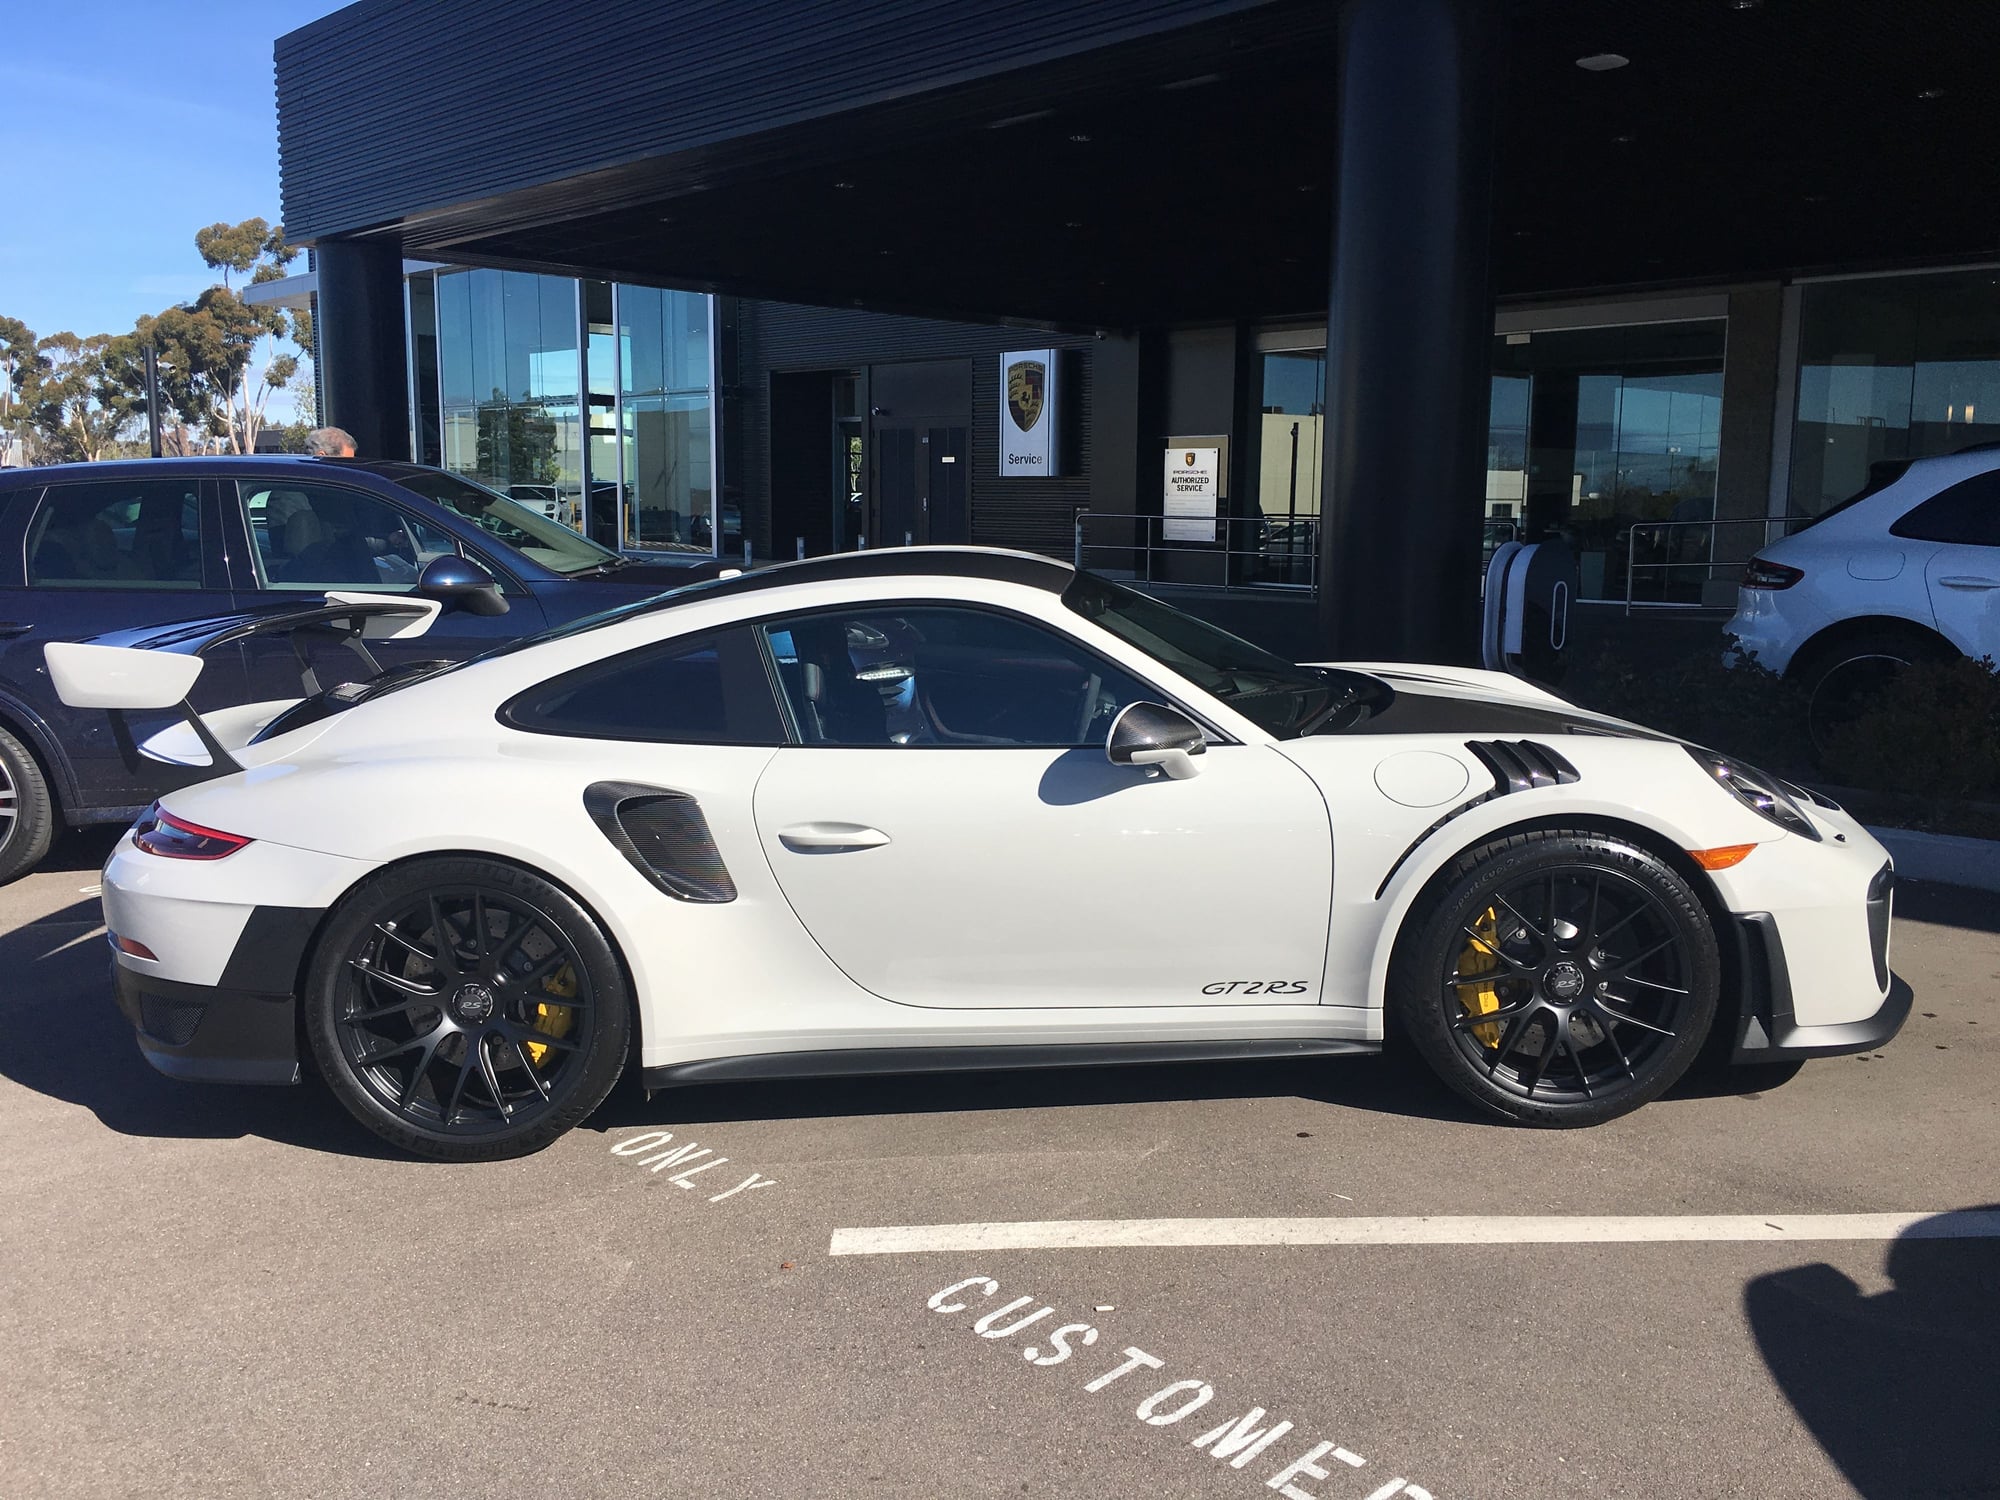 2018 Porsche 911 - 2018 Porsche 911 GT2 - Used - VIN WPOAE2A98JS186004 - 200 Miles - 6 cyl - 2WD - Automatic - Coupe - Other - Rancho Santa Fe, CA 92067, United States